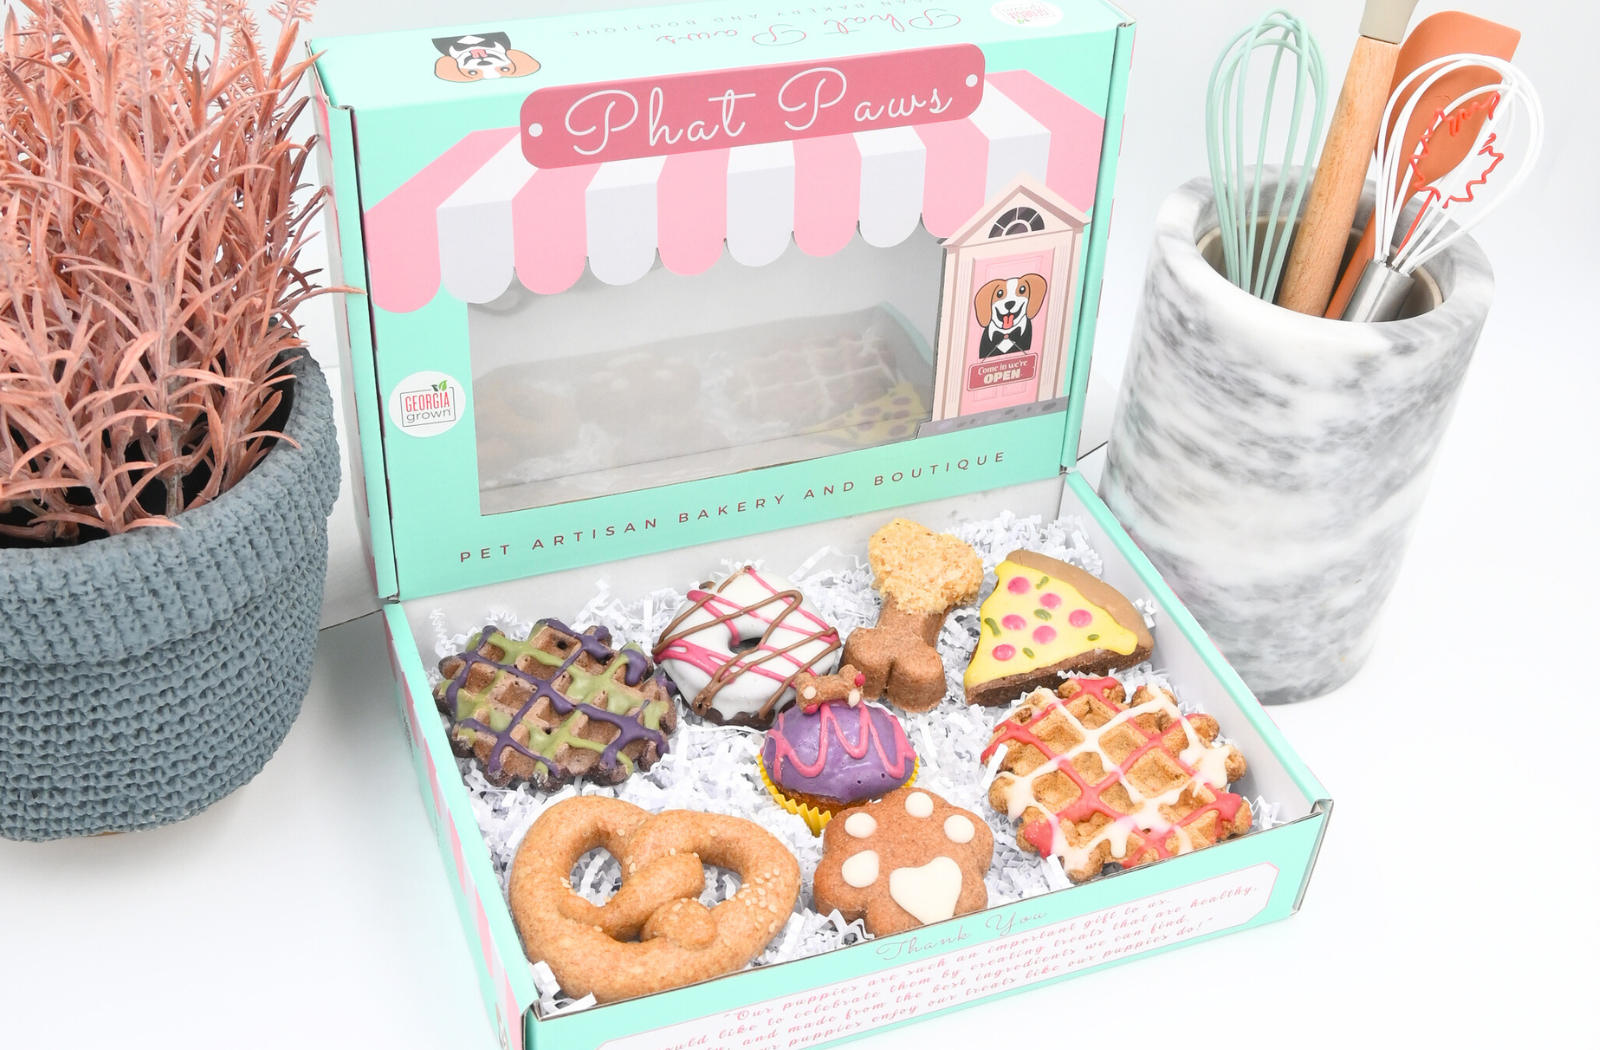 Build your own variety 8 treat gift box for $18